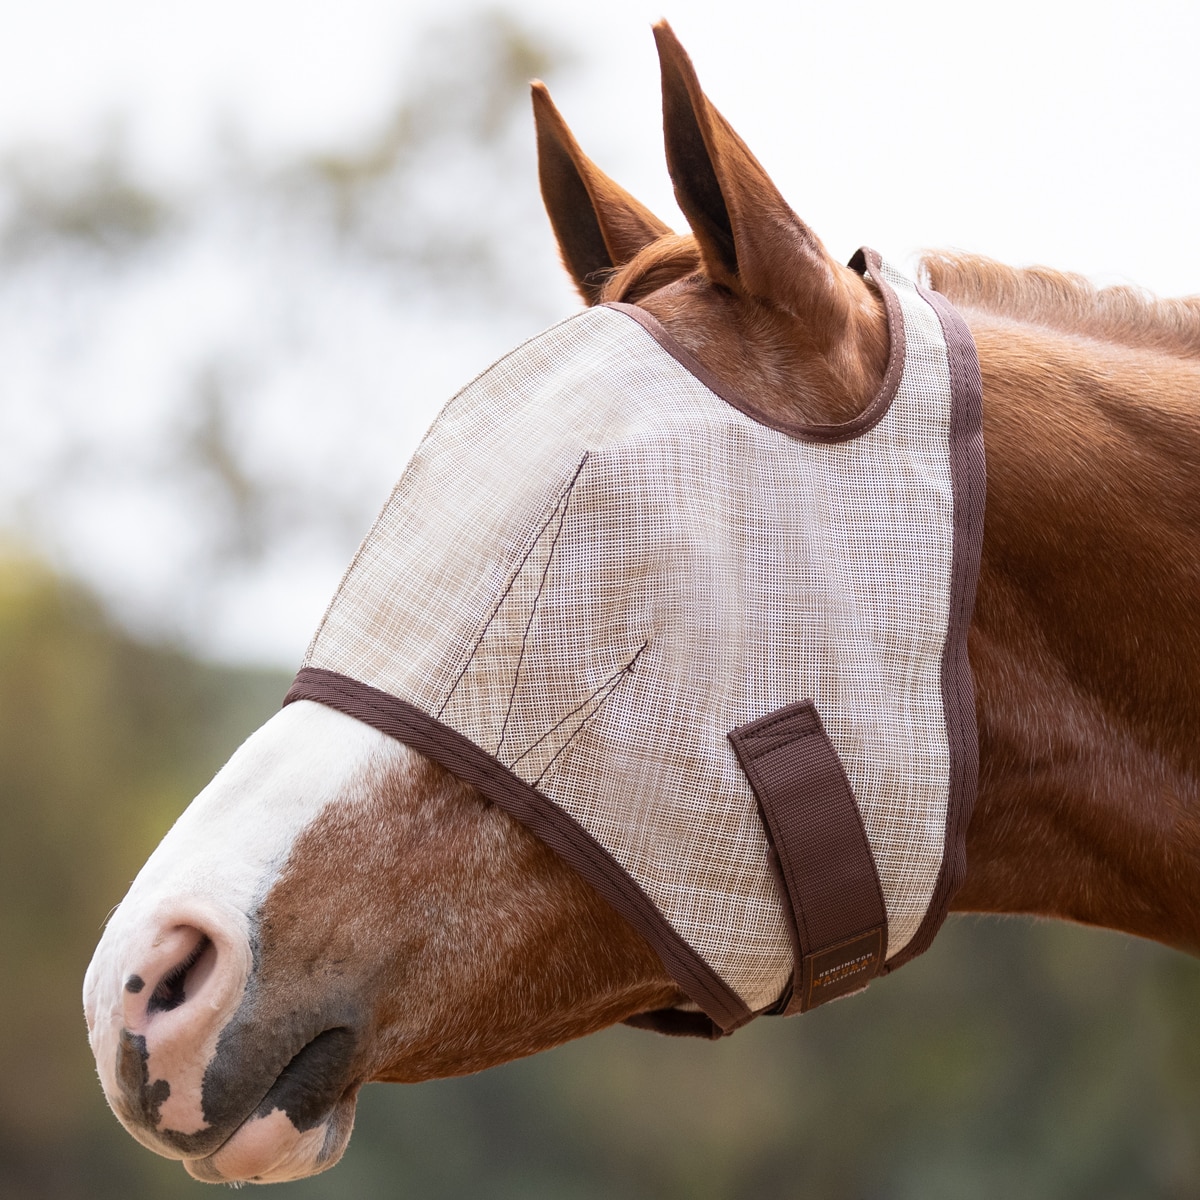 SILVER Details about   NEW SmartPak Classic Standard Horse Fly UV Mask without Ears COB